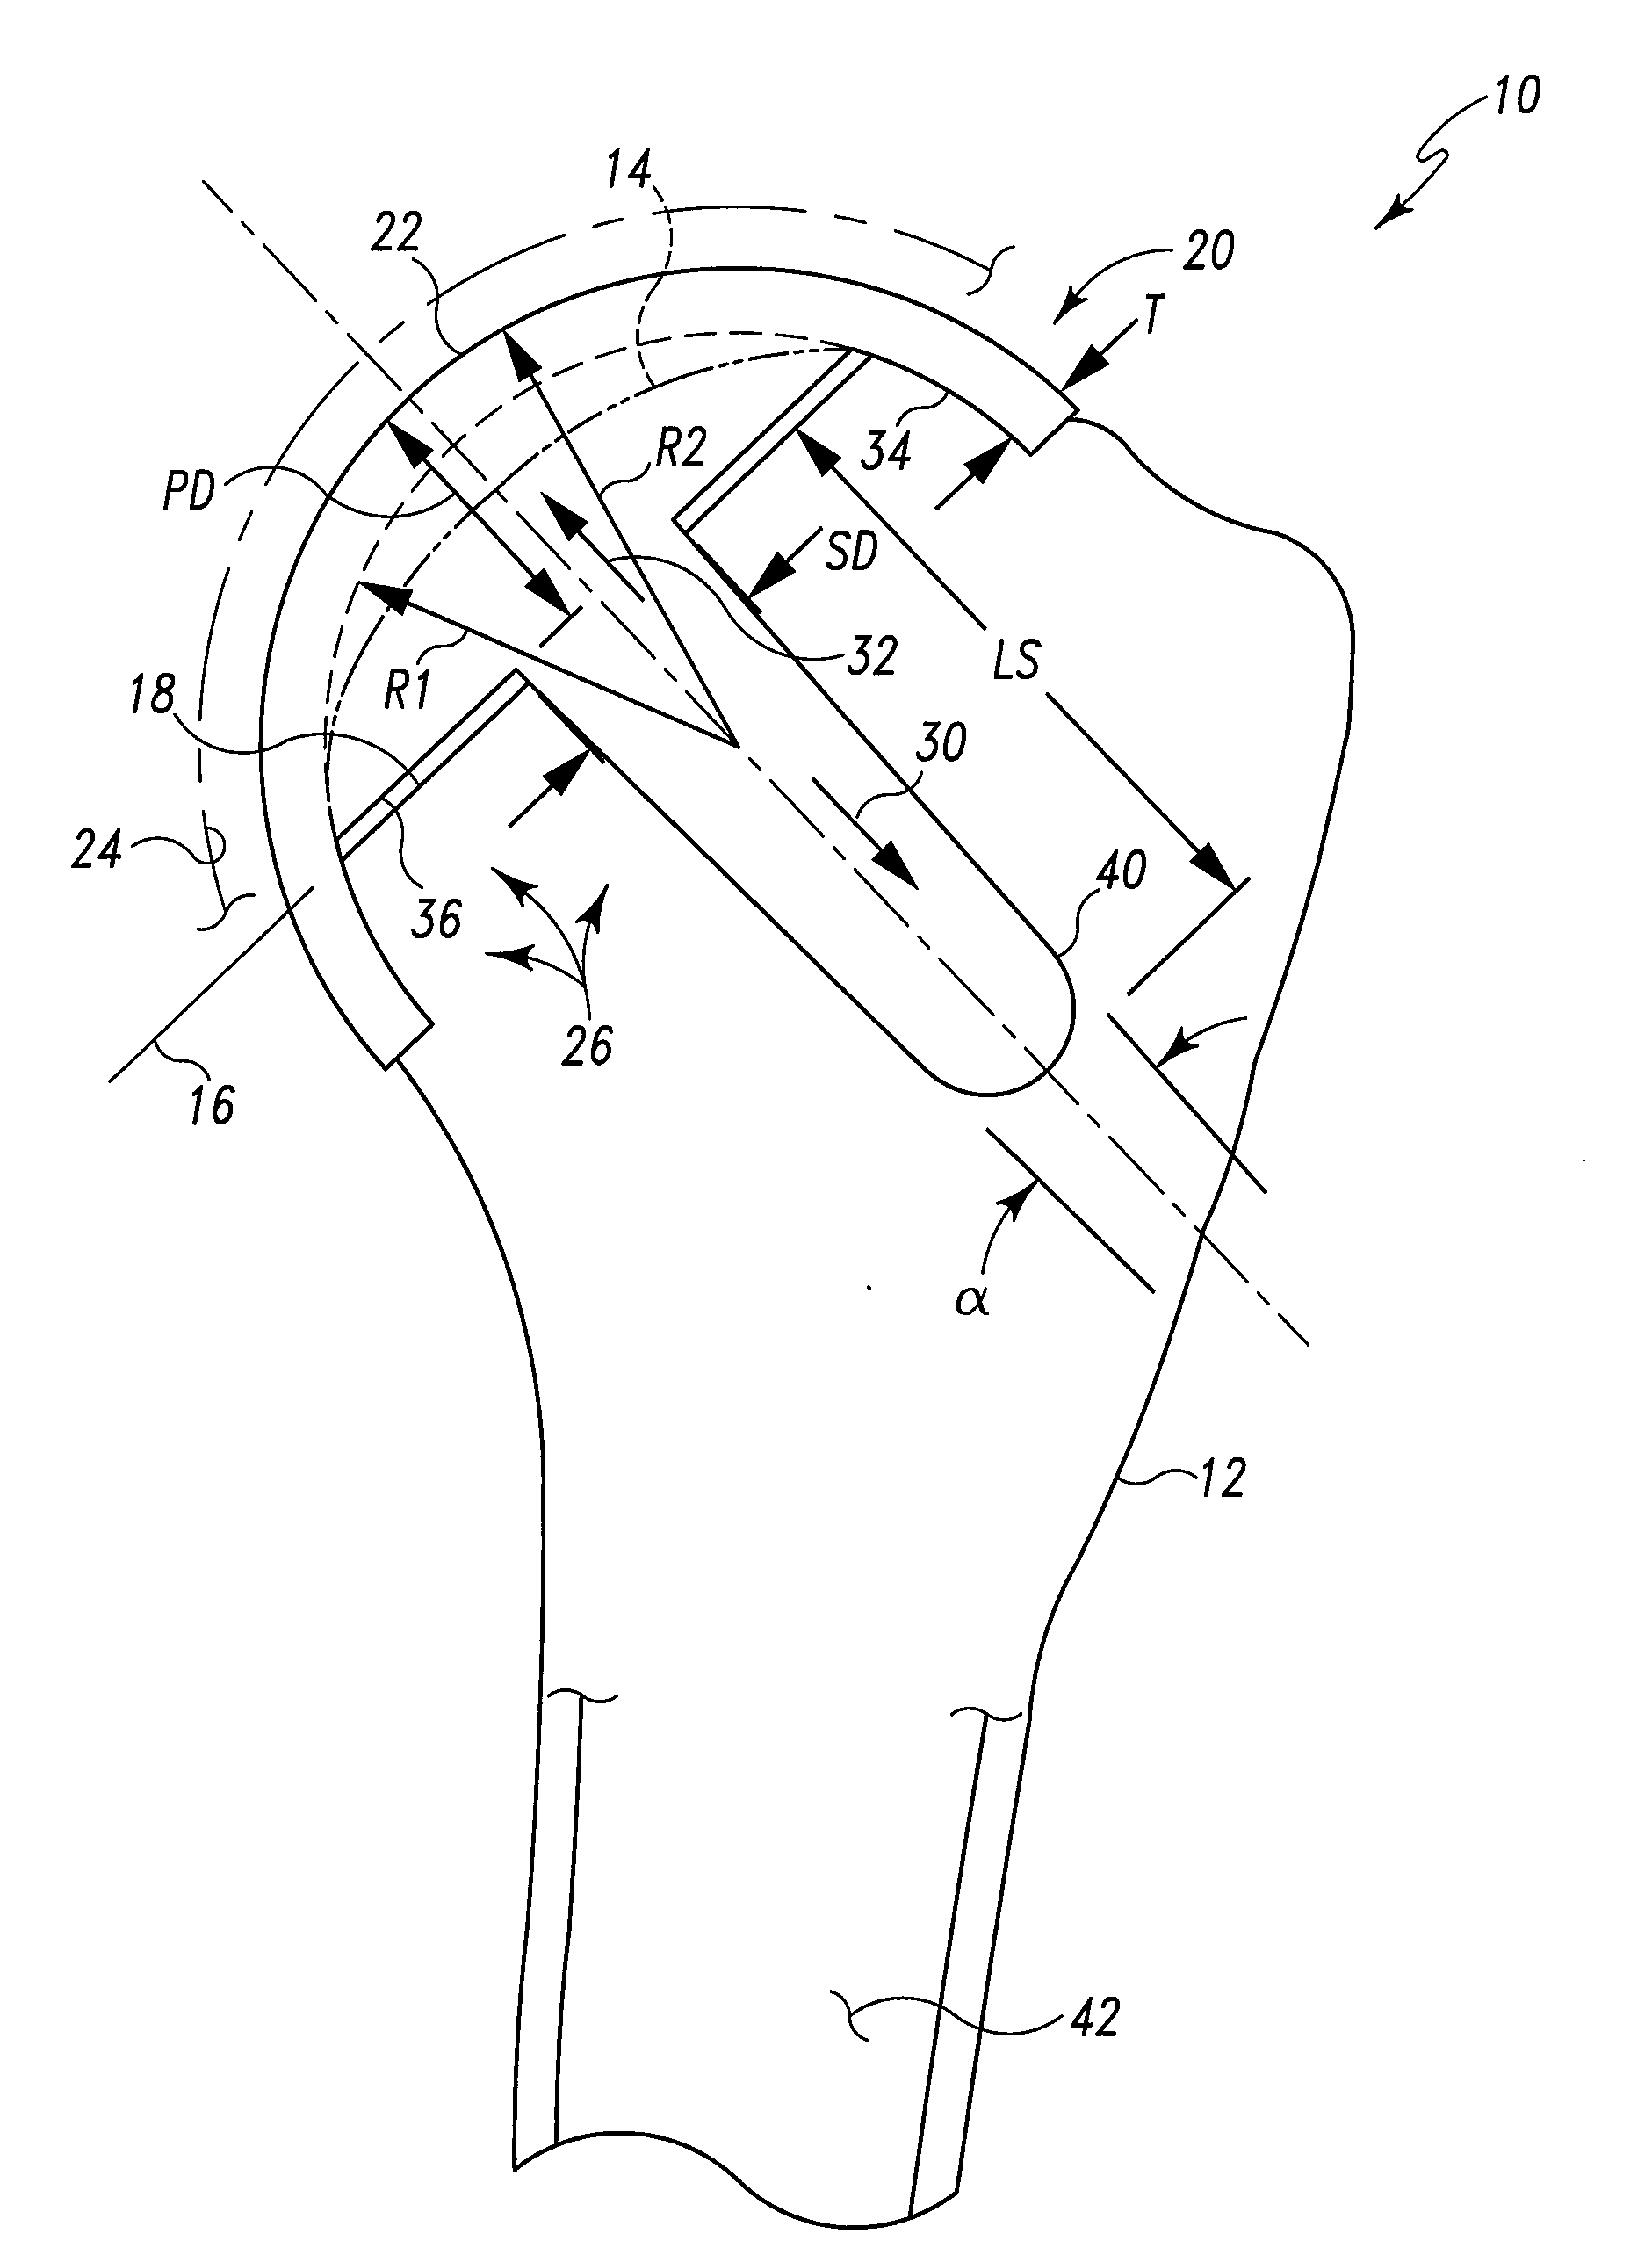 Articulating Surface Replacement Prosthesis